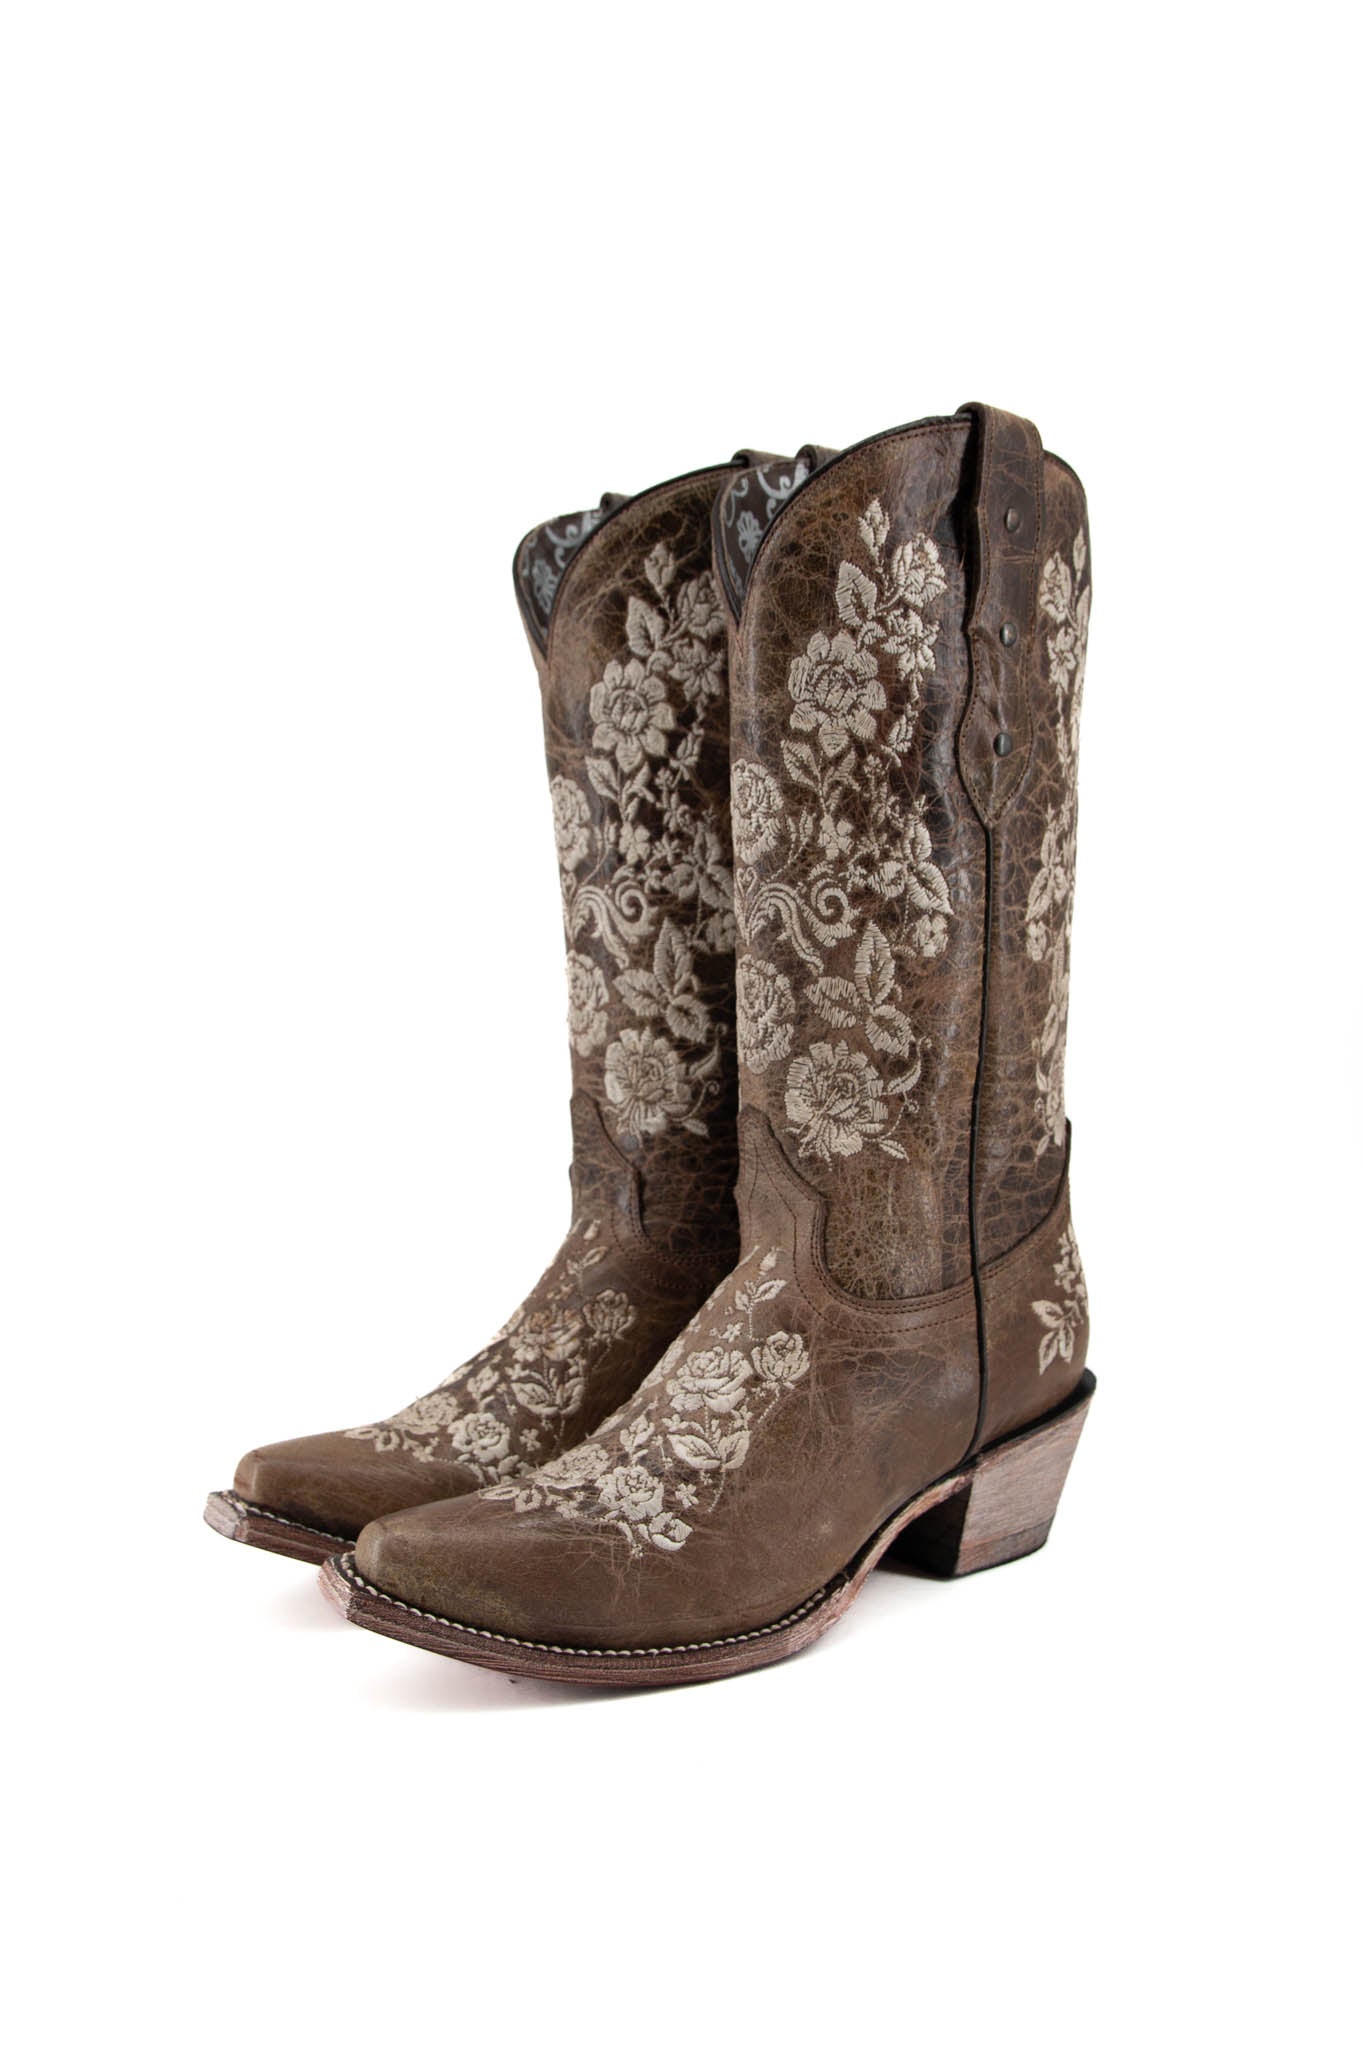 619 - Maricela Crater Cafe Snip Toe Cowgirl Boot